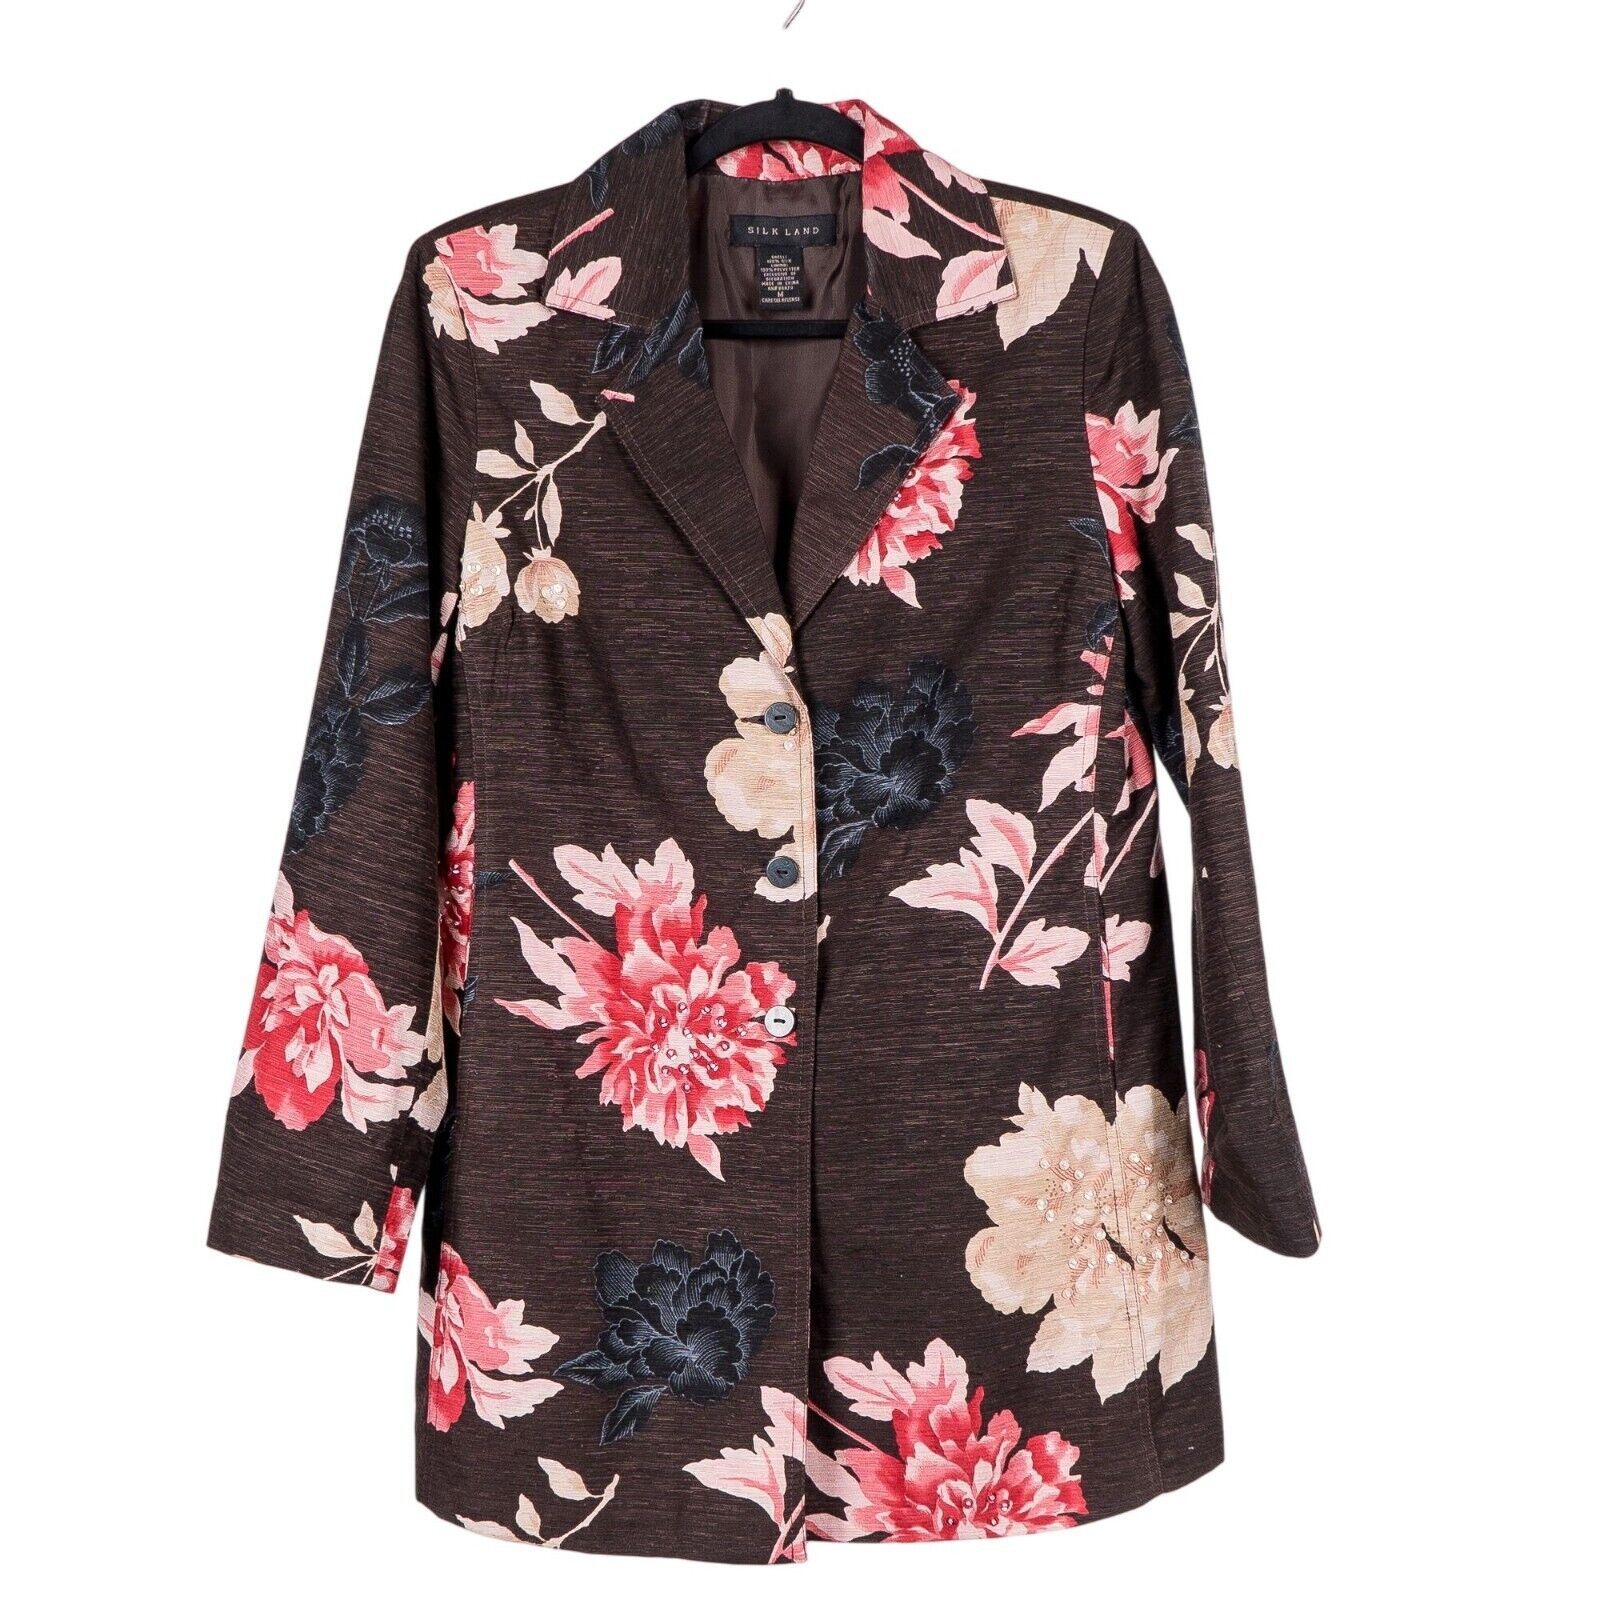 Primary image for Silk Land Blazer M Womens Silk Floral Brown Pink Long Jacket Collar Buttons